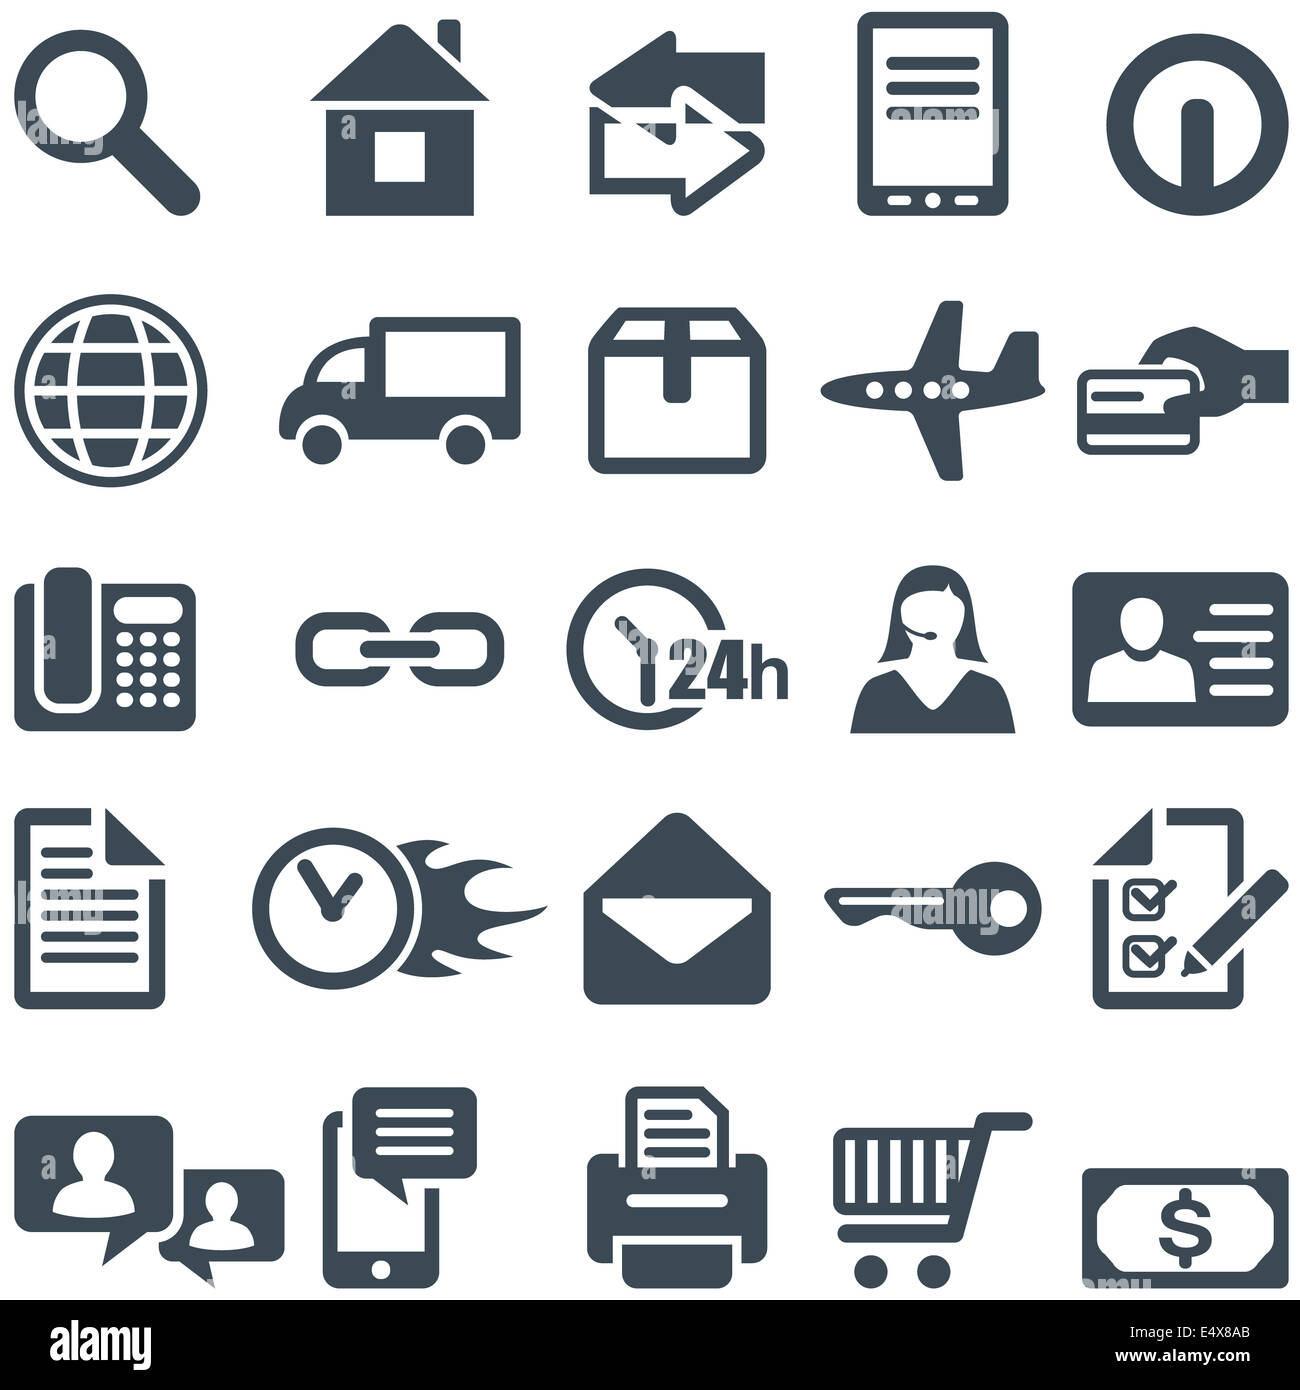 Icons for the web site or mobile app. Stock Photo